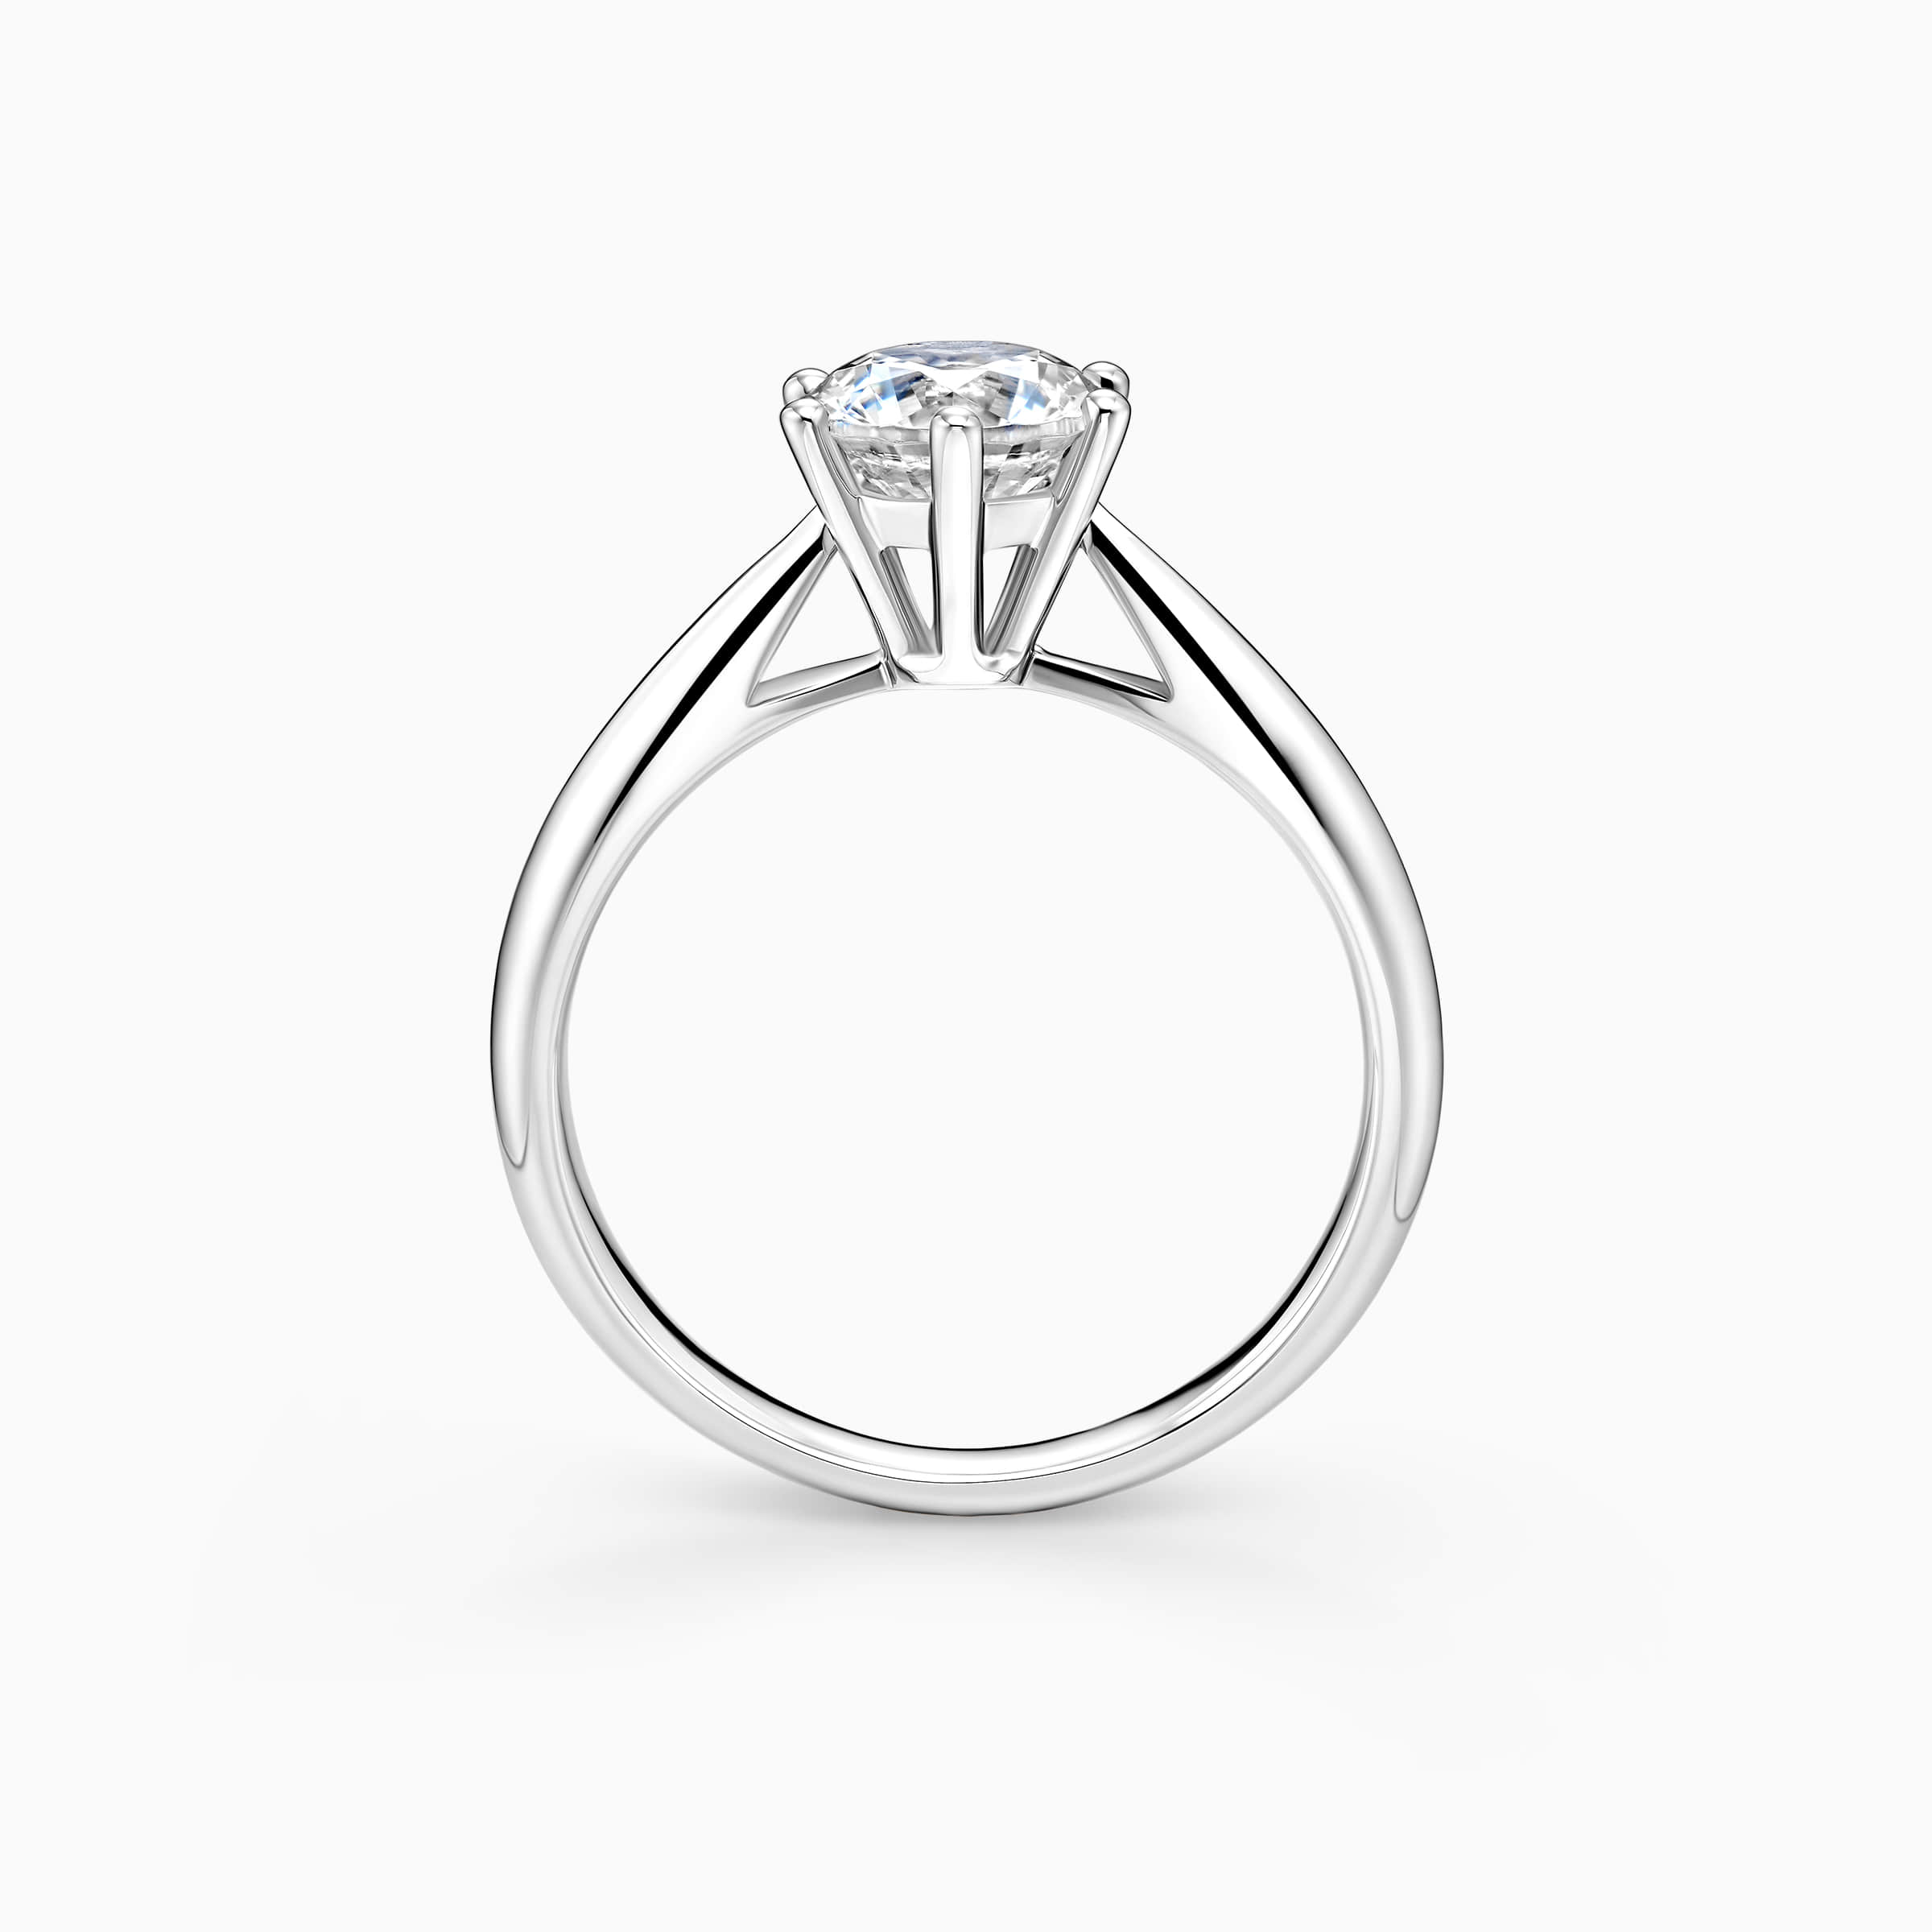 DR forevr 6 prong solitaire ring